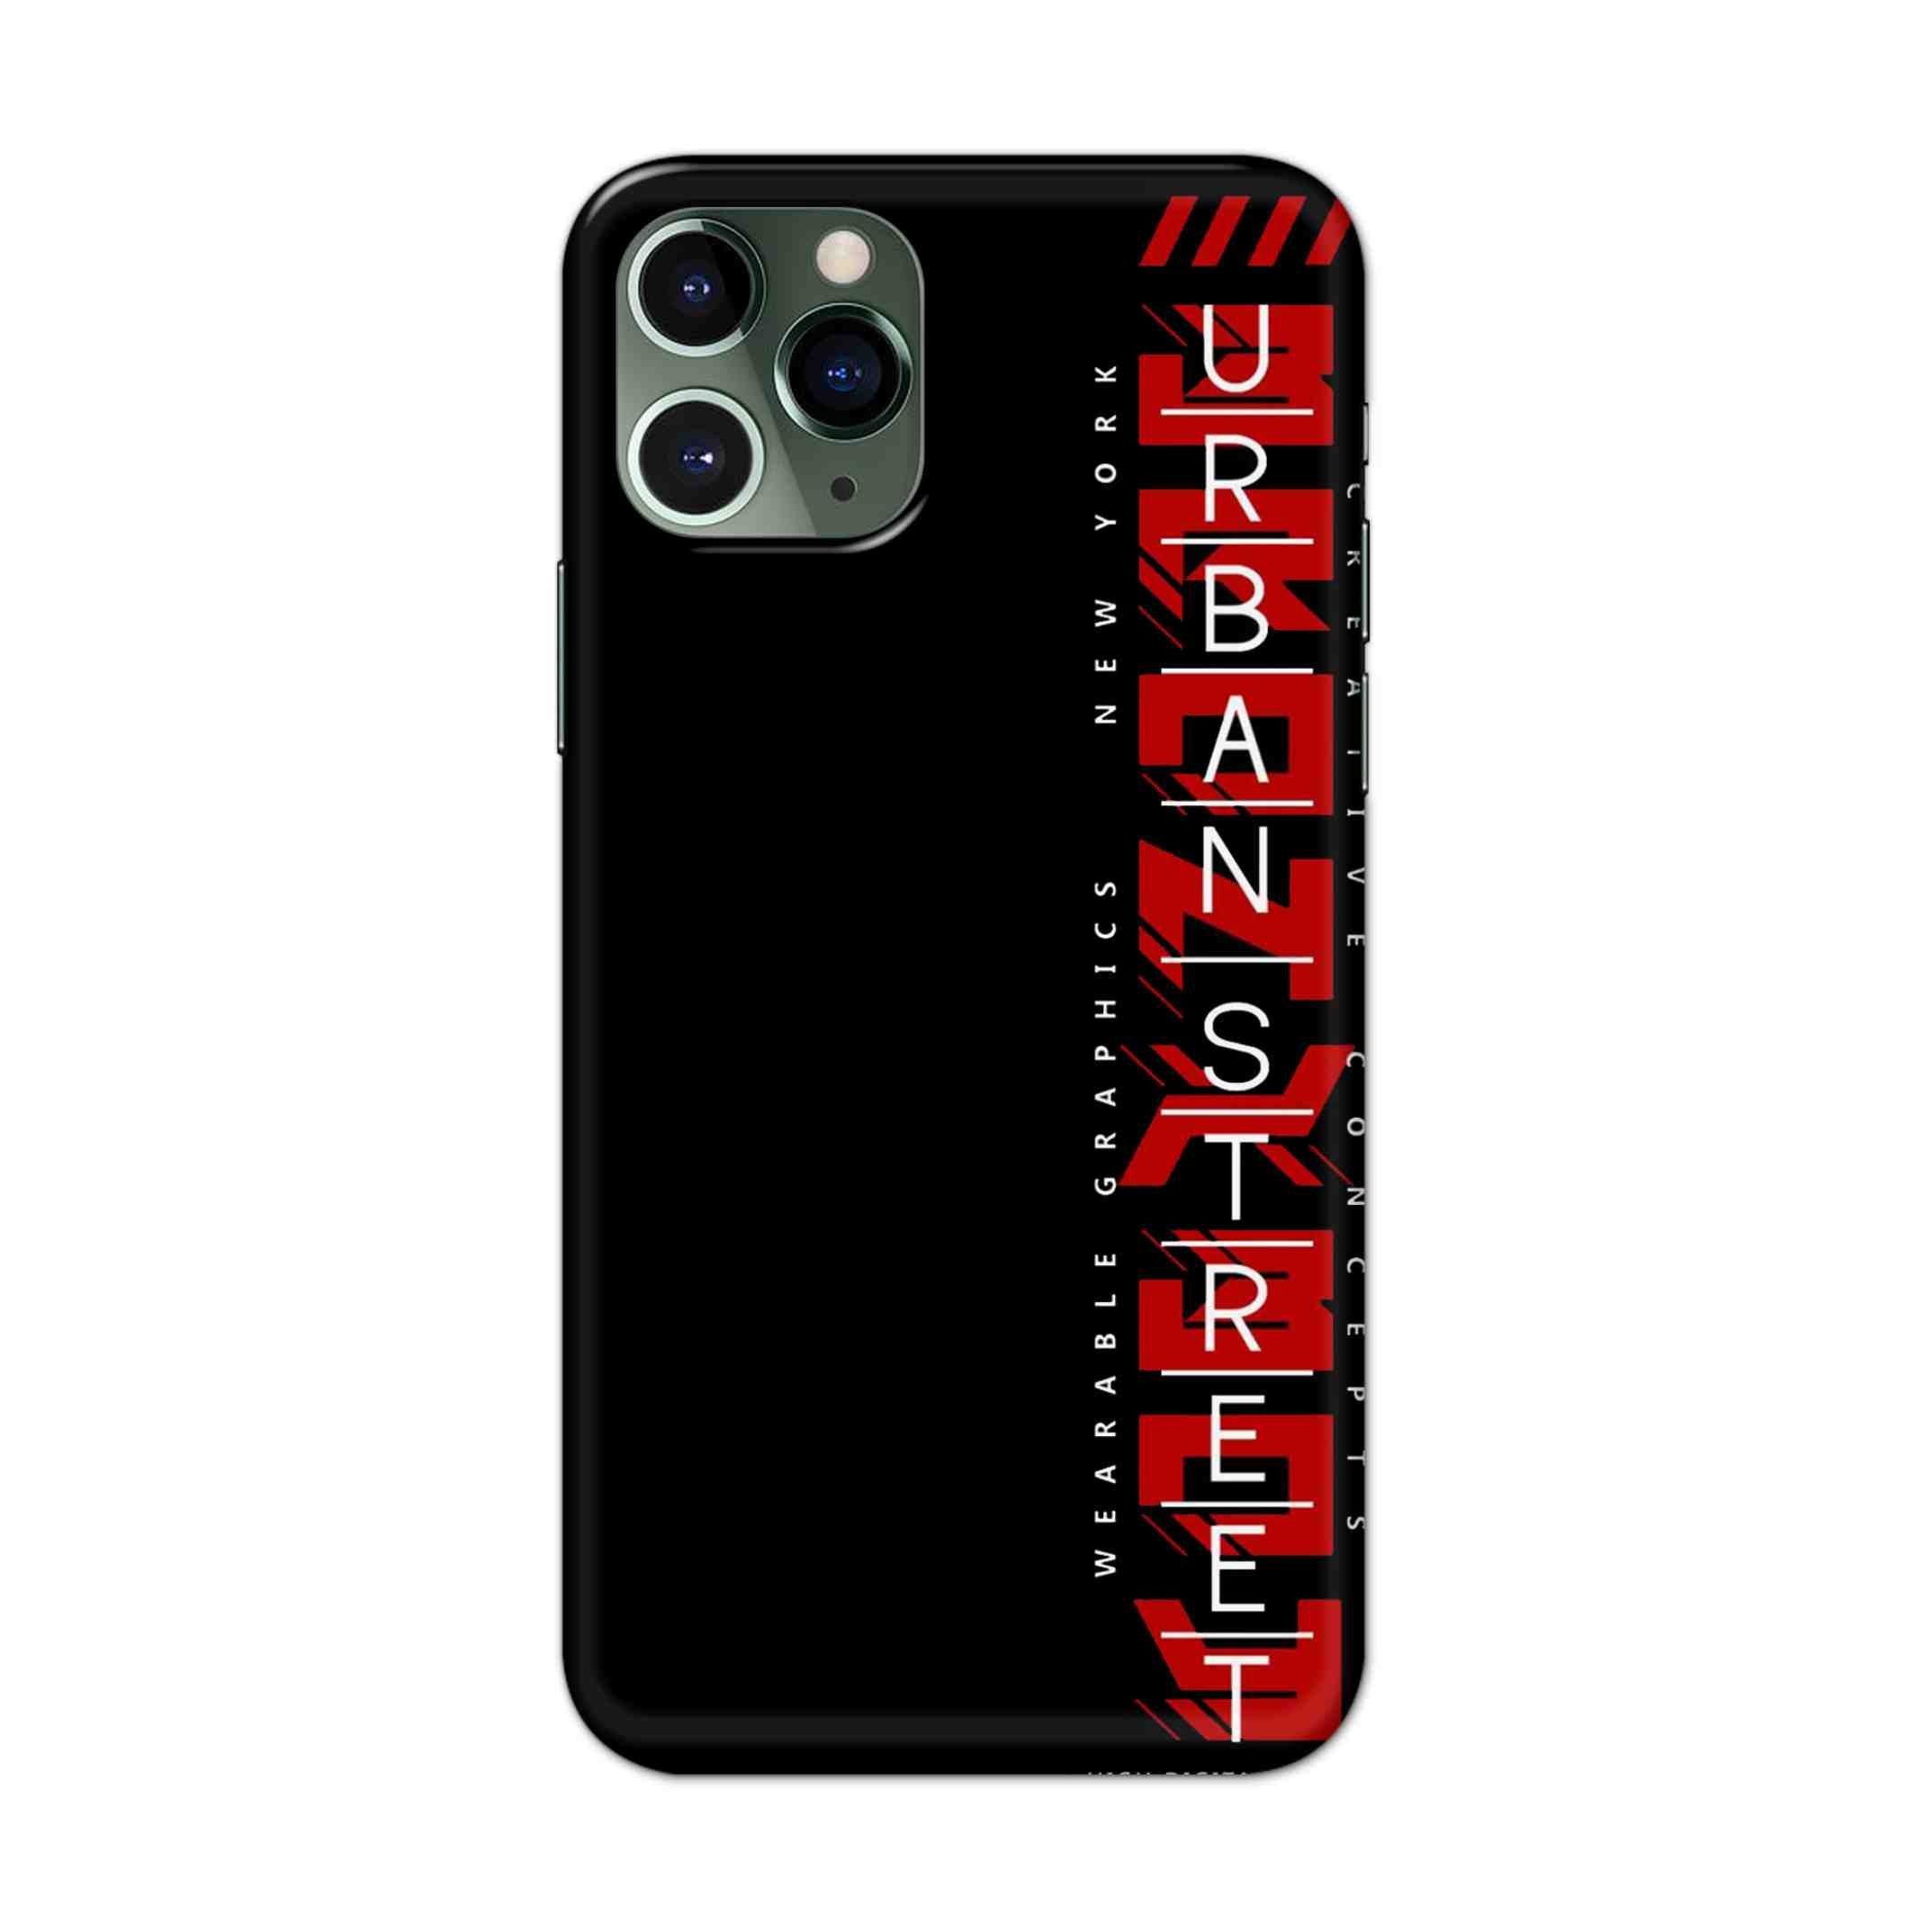 Buy Urban Street Hard Back Mobile Phone Case/Cover For iPhone 11 Pro Online